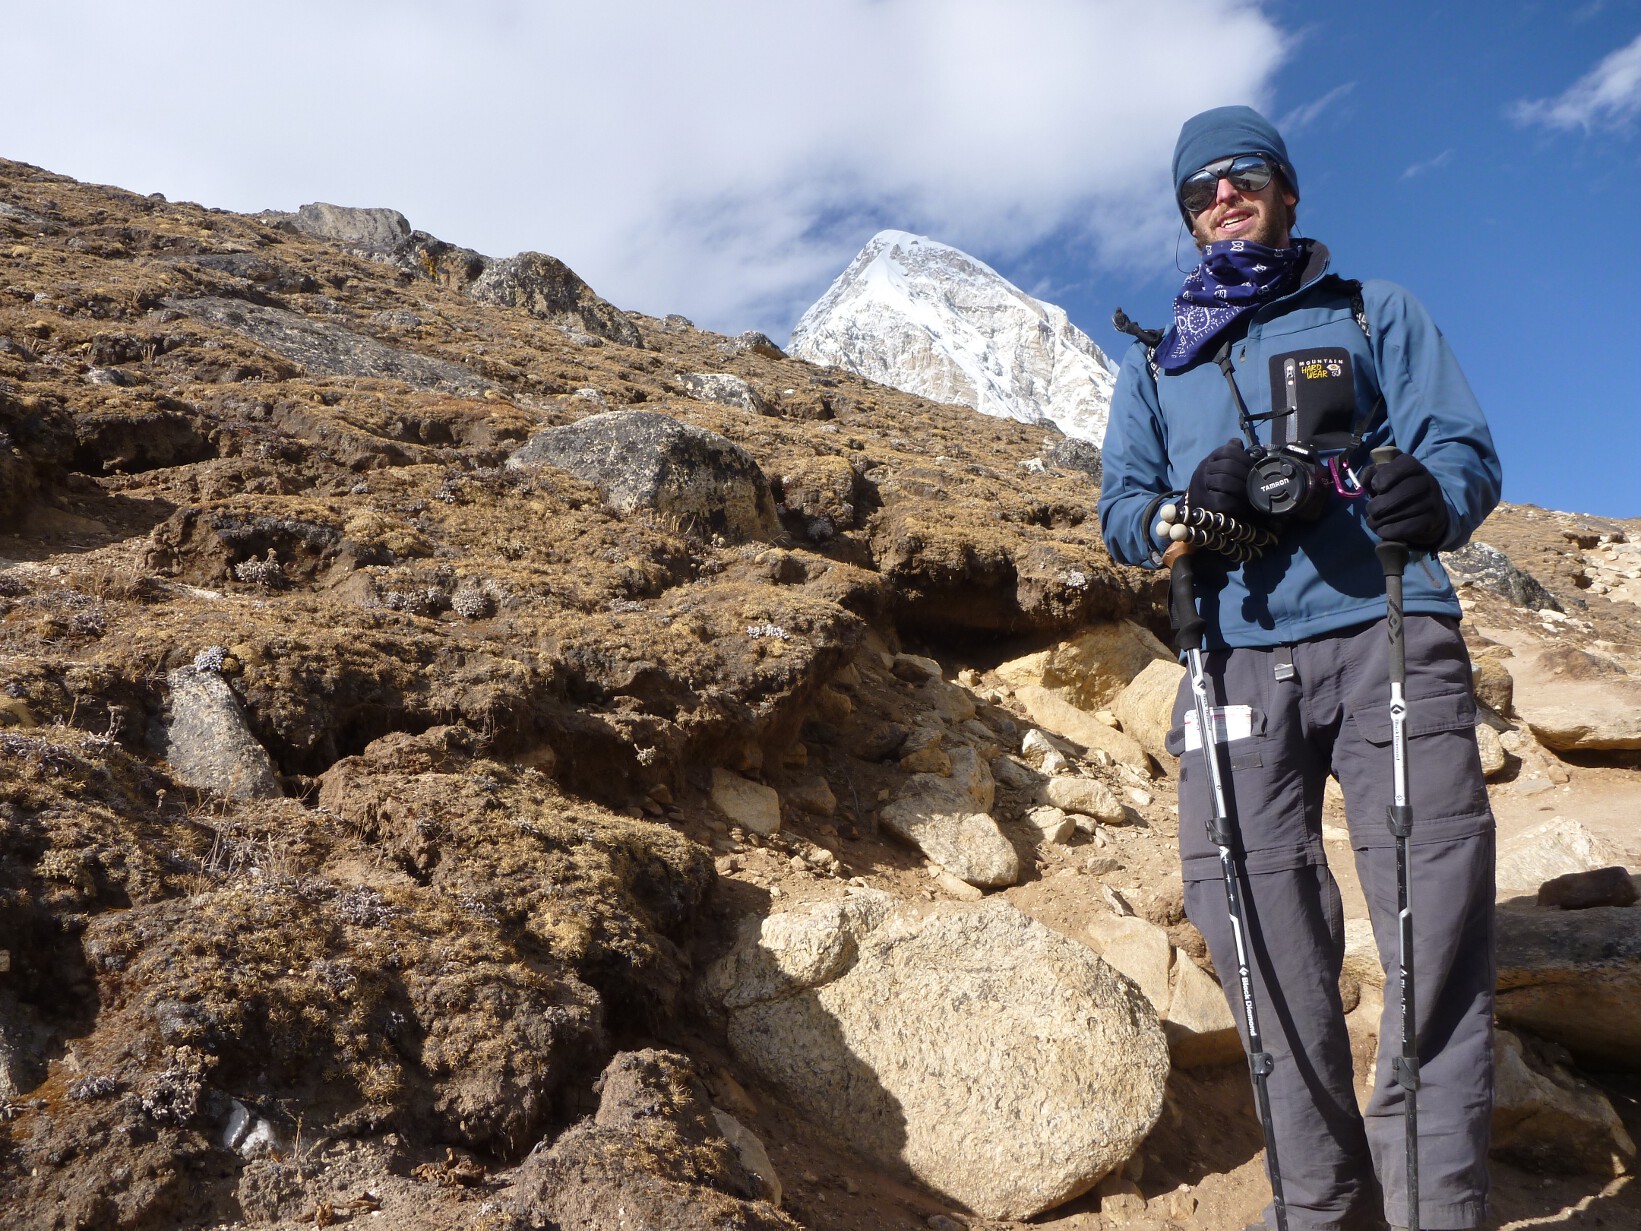 Brian hikes with a Canon SLR and Joby tripod near Everest Base Camp, Nepal.